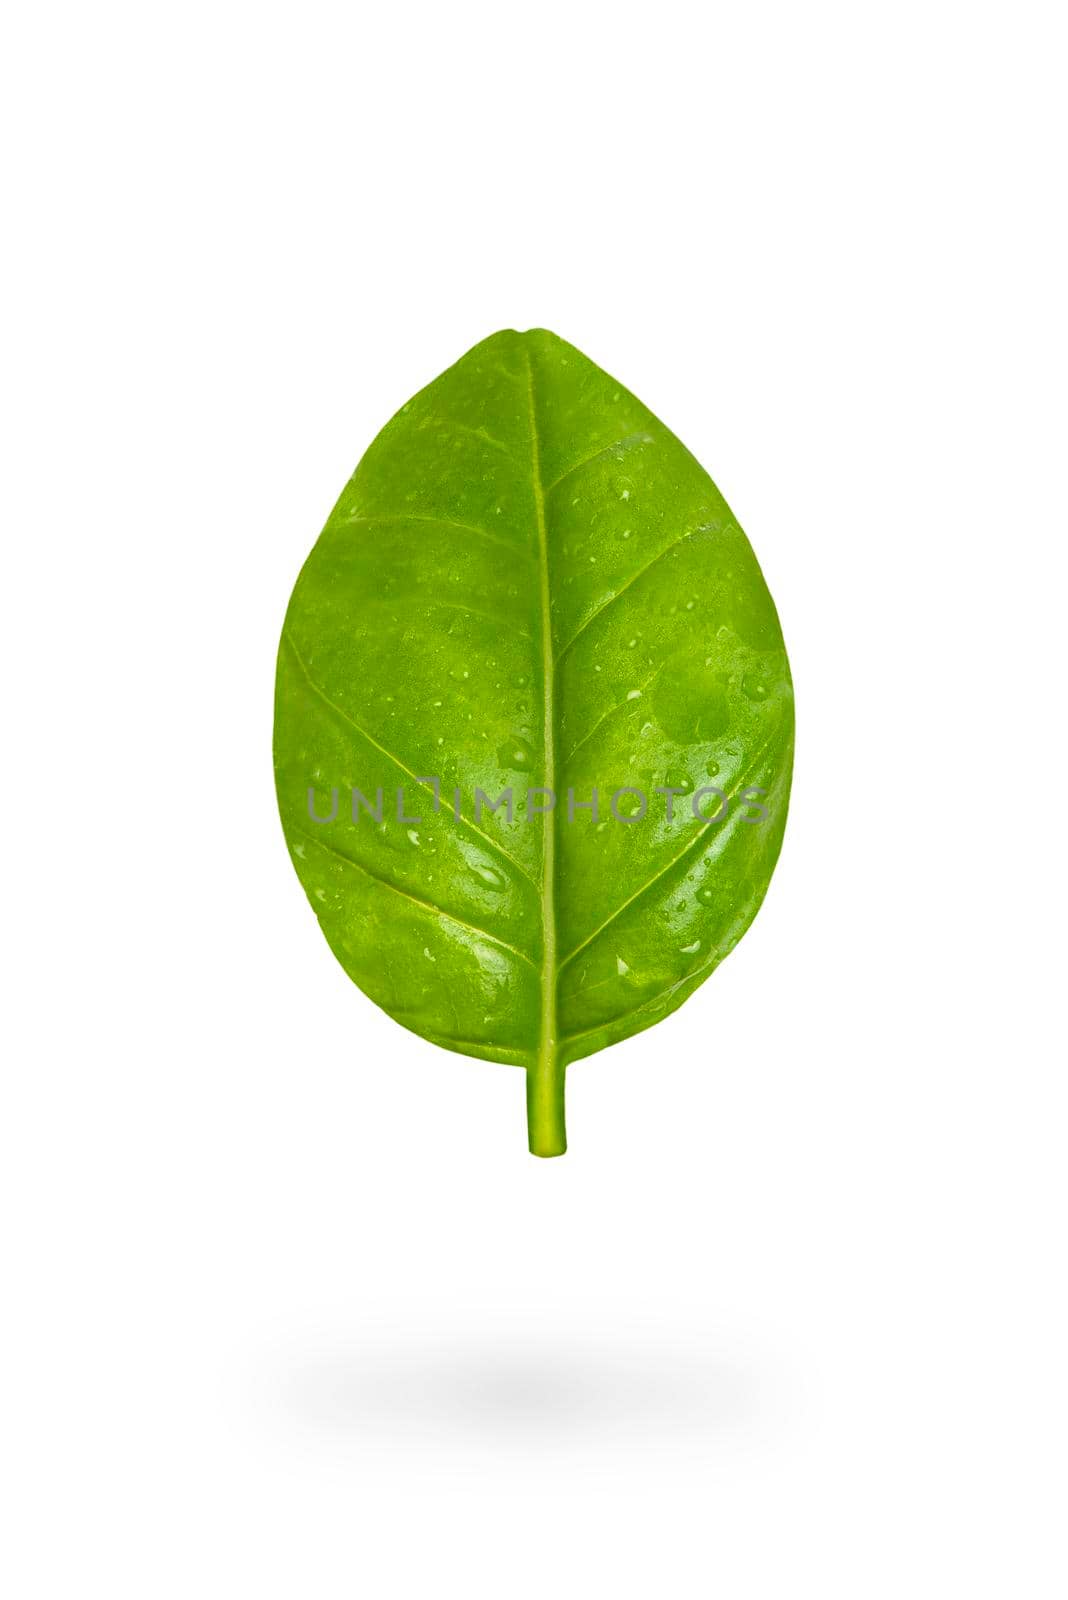 Fresh basil leaves on a white isolated background. A green basil leaf with water drops falls casting a shadow. Blank isolate for inserting a draft or label.